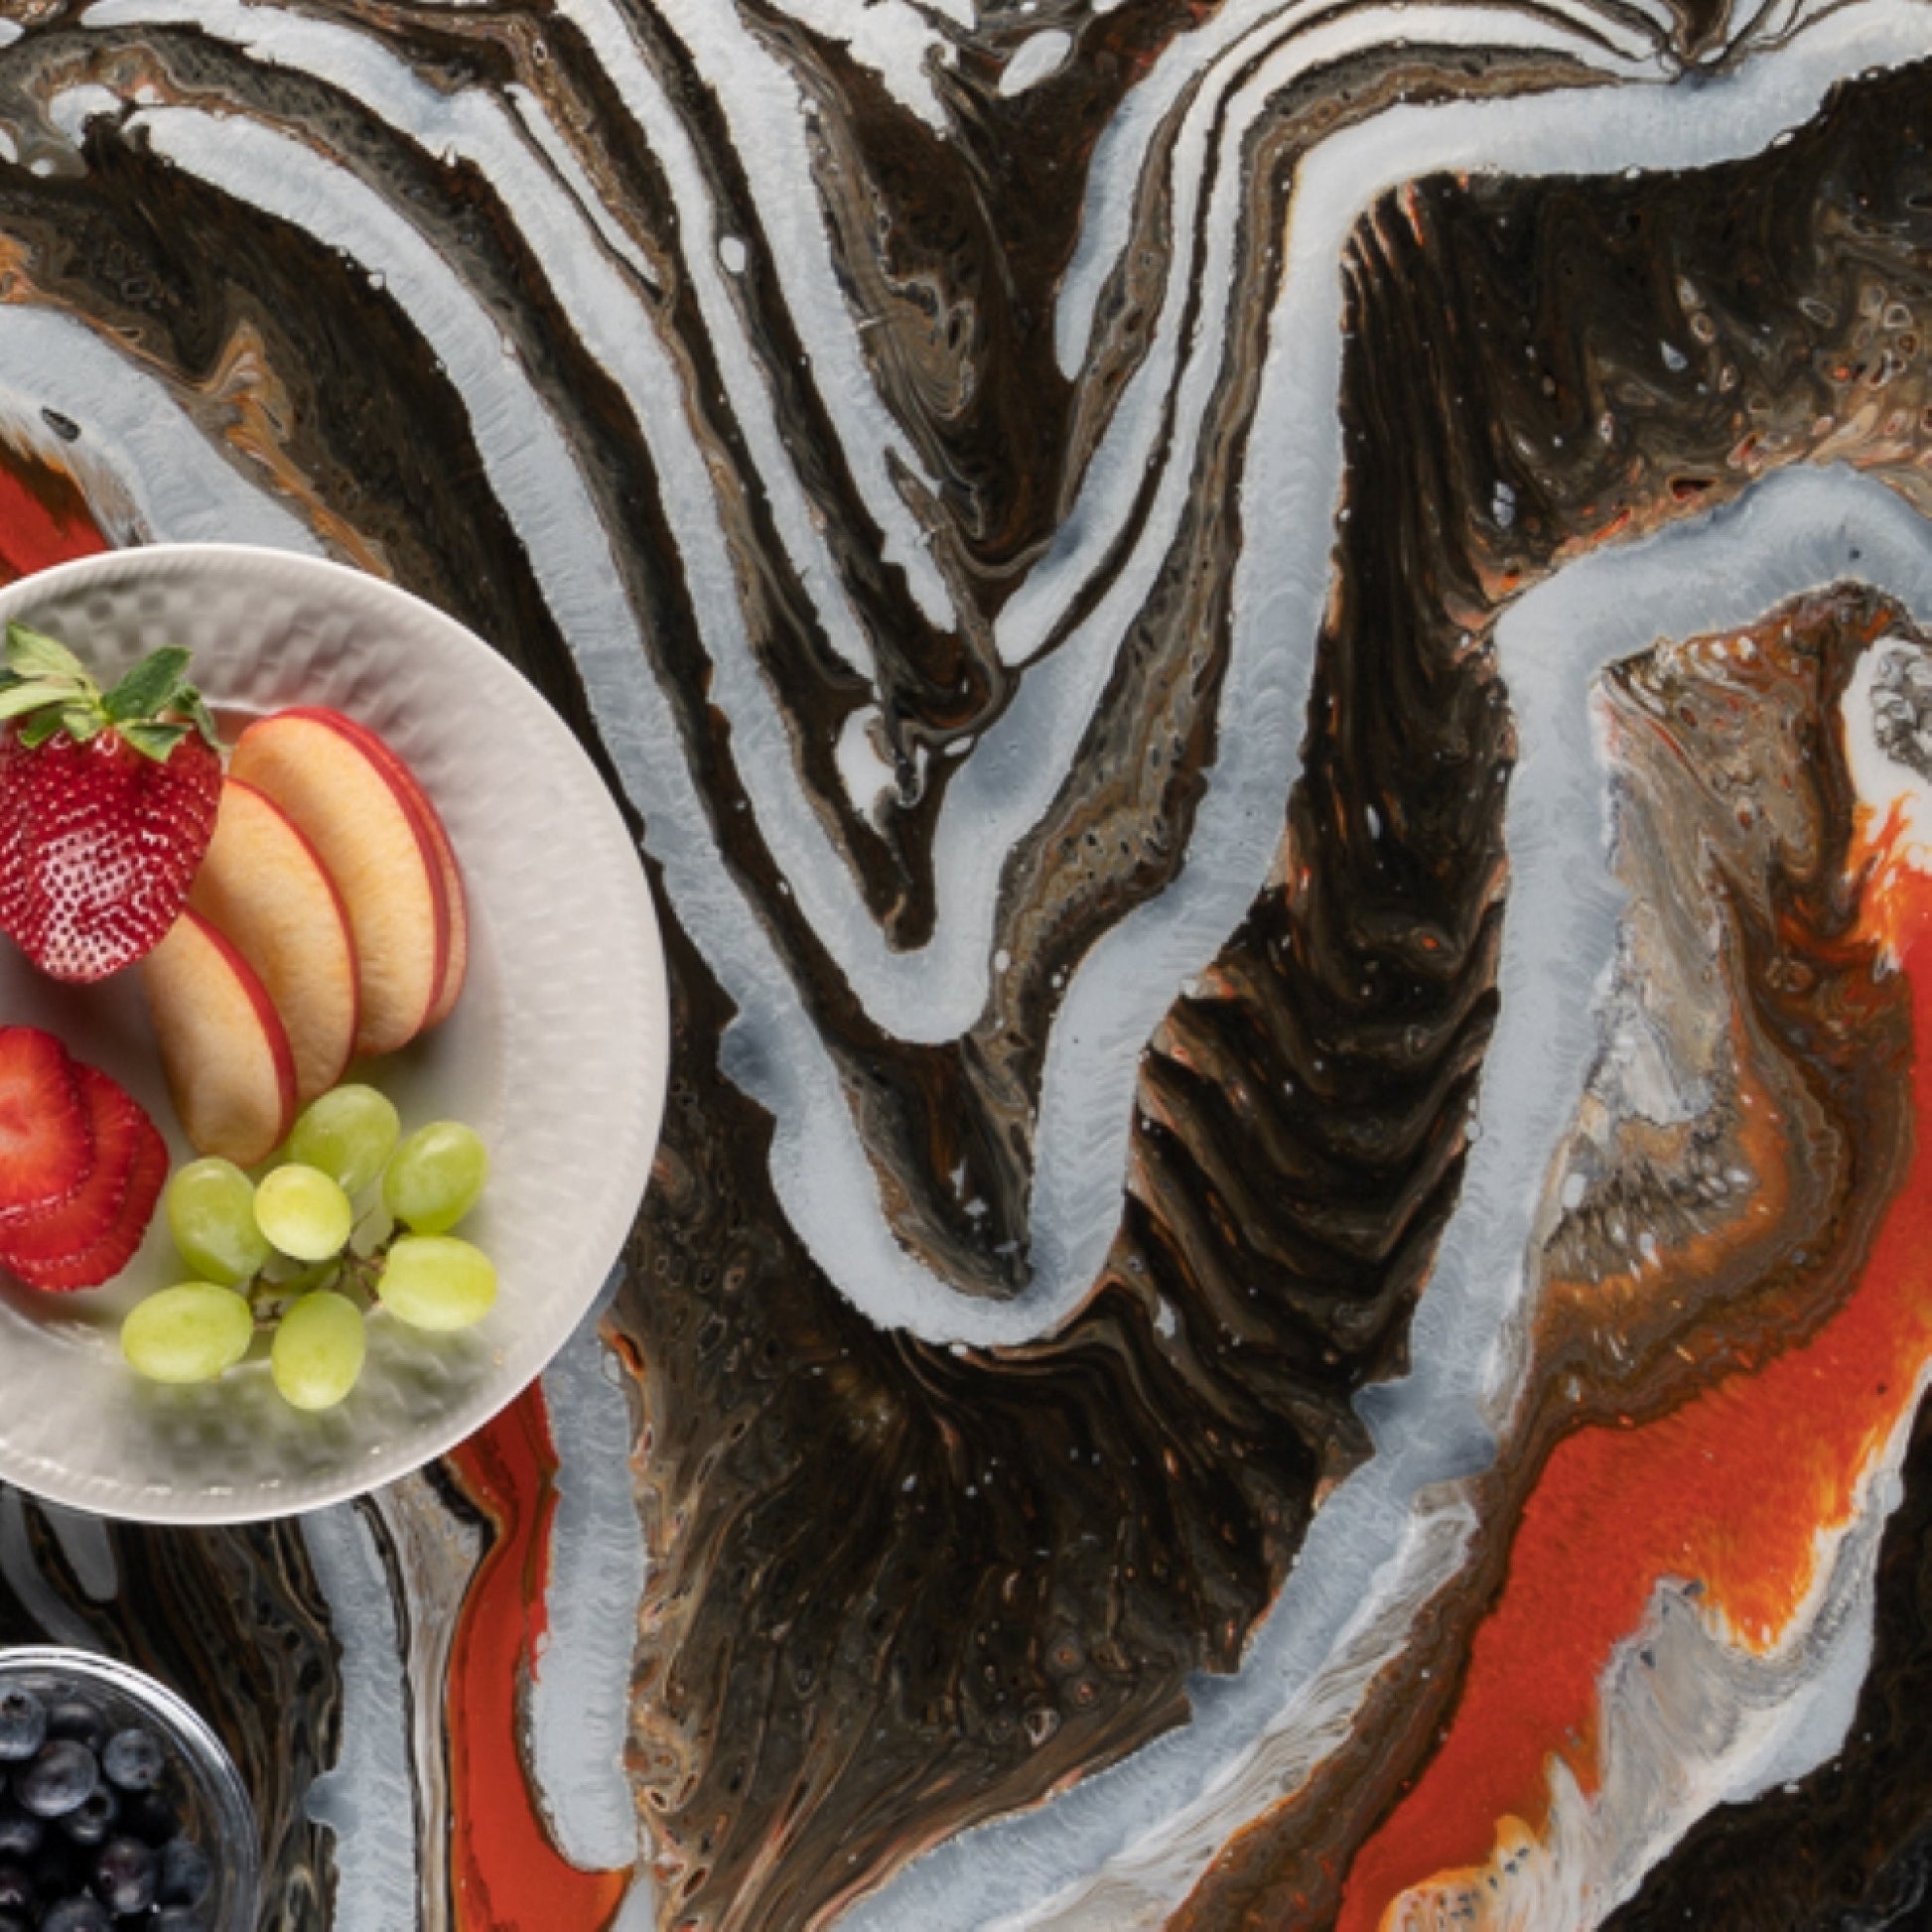 Functional Artistry - AYERS ROCK Epoxy Countertop Kit Creates Realistic Stone Surfaces